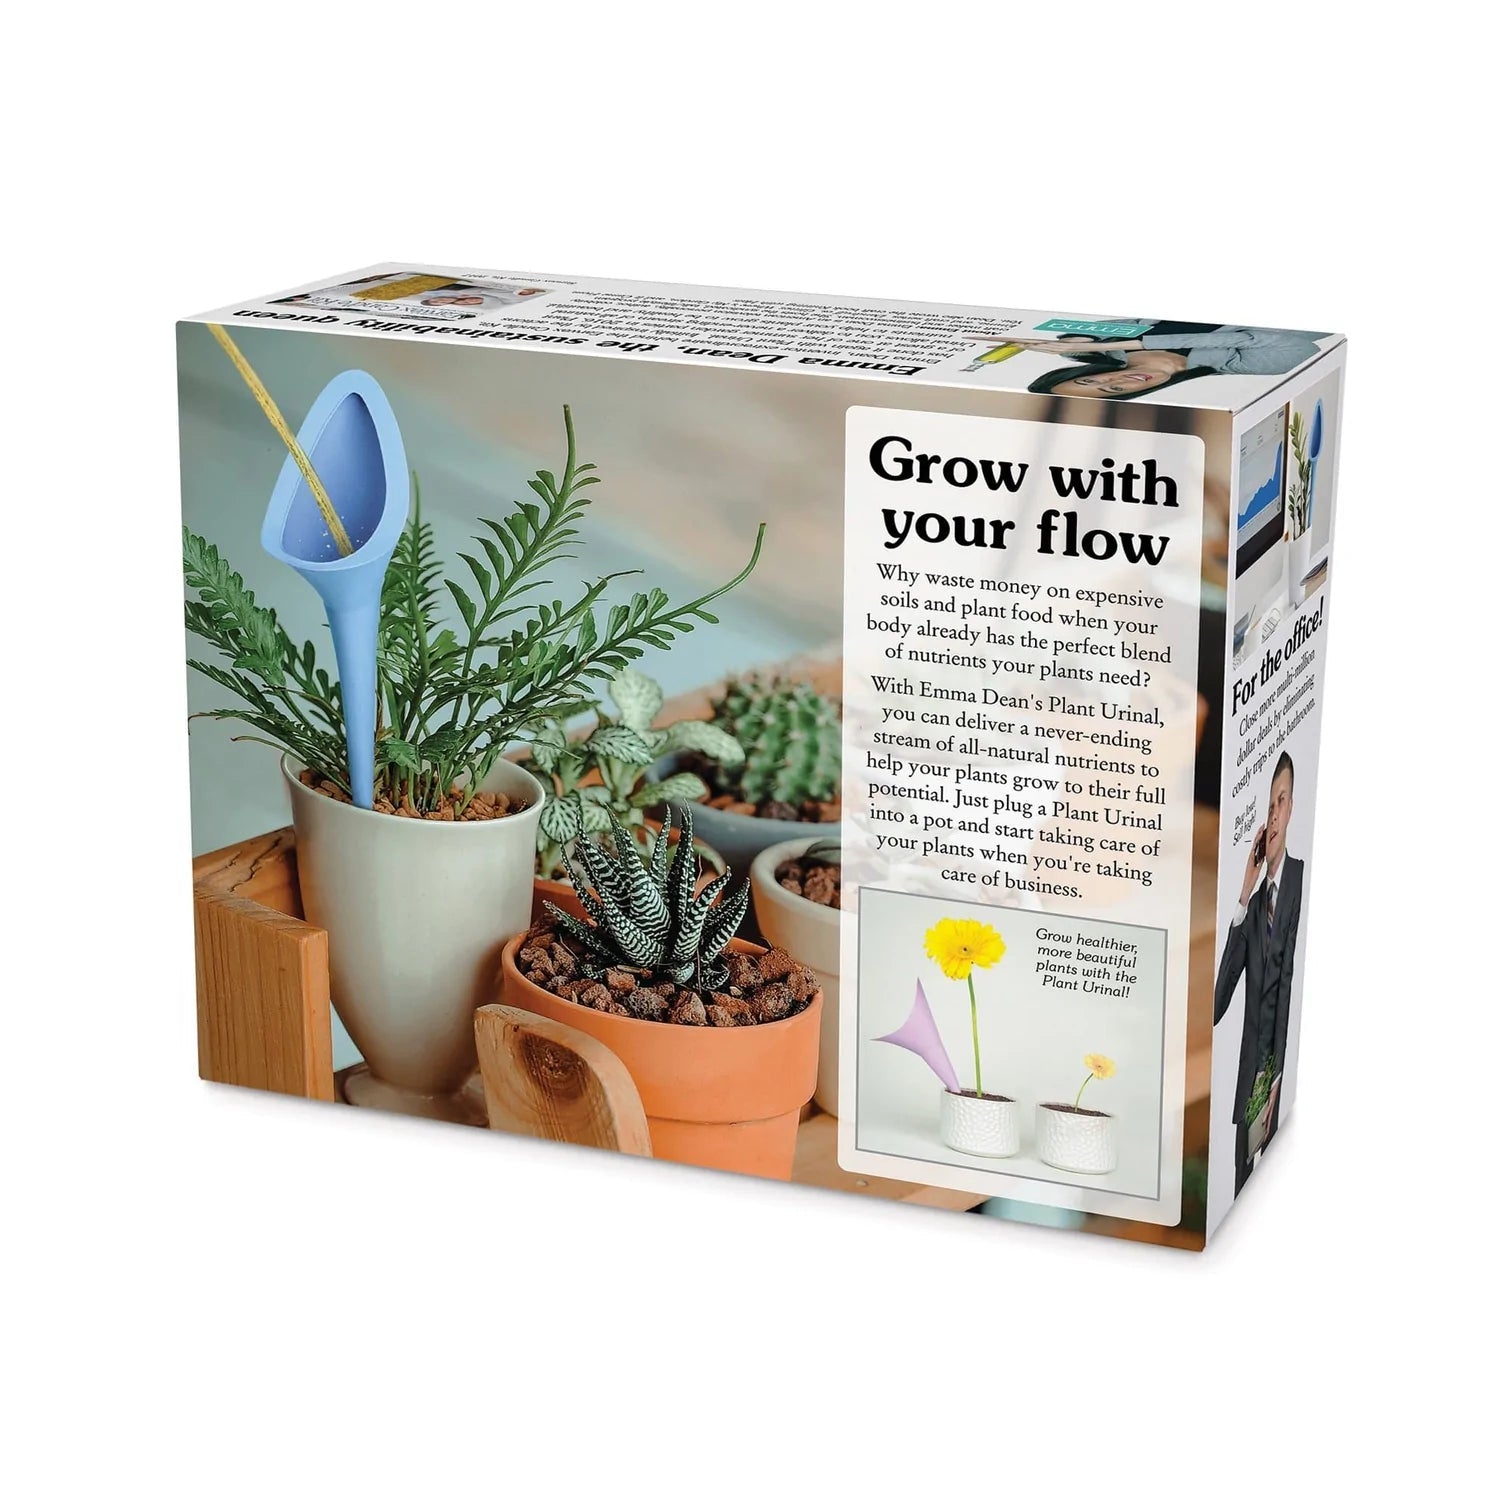 Plant Urinal Fake Product Pranks Anonymous send hilarious pranks and gag gifts to your friends or family.